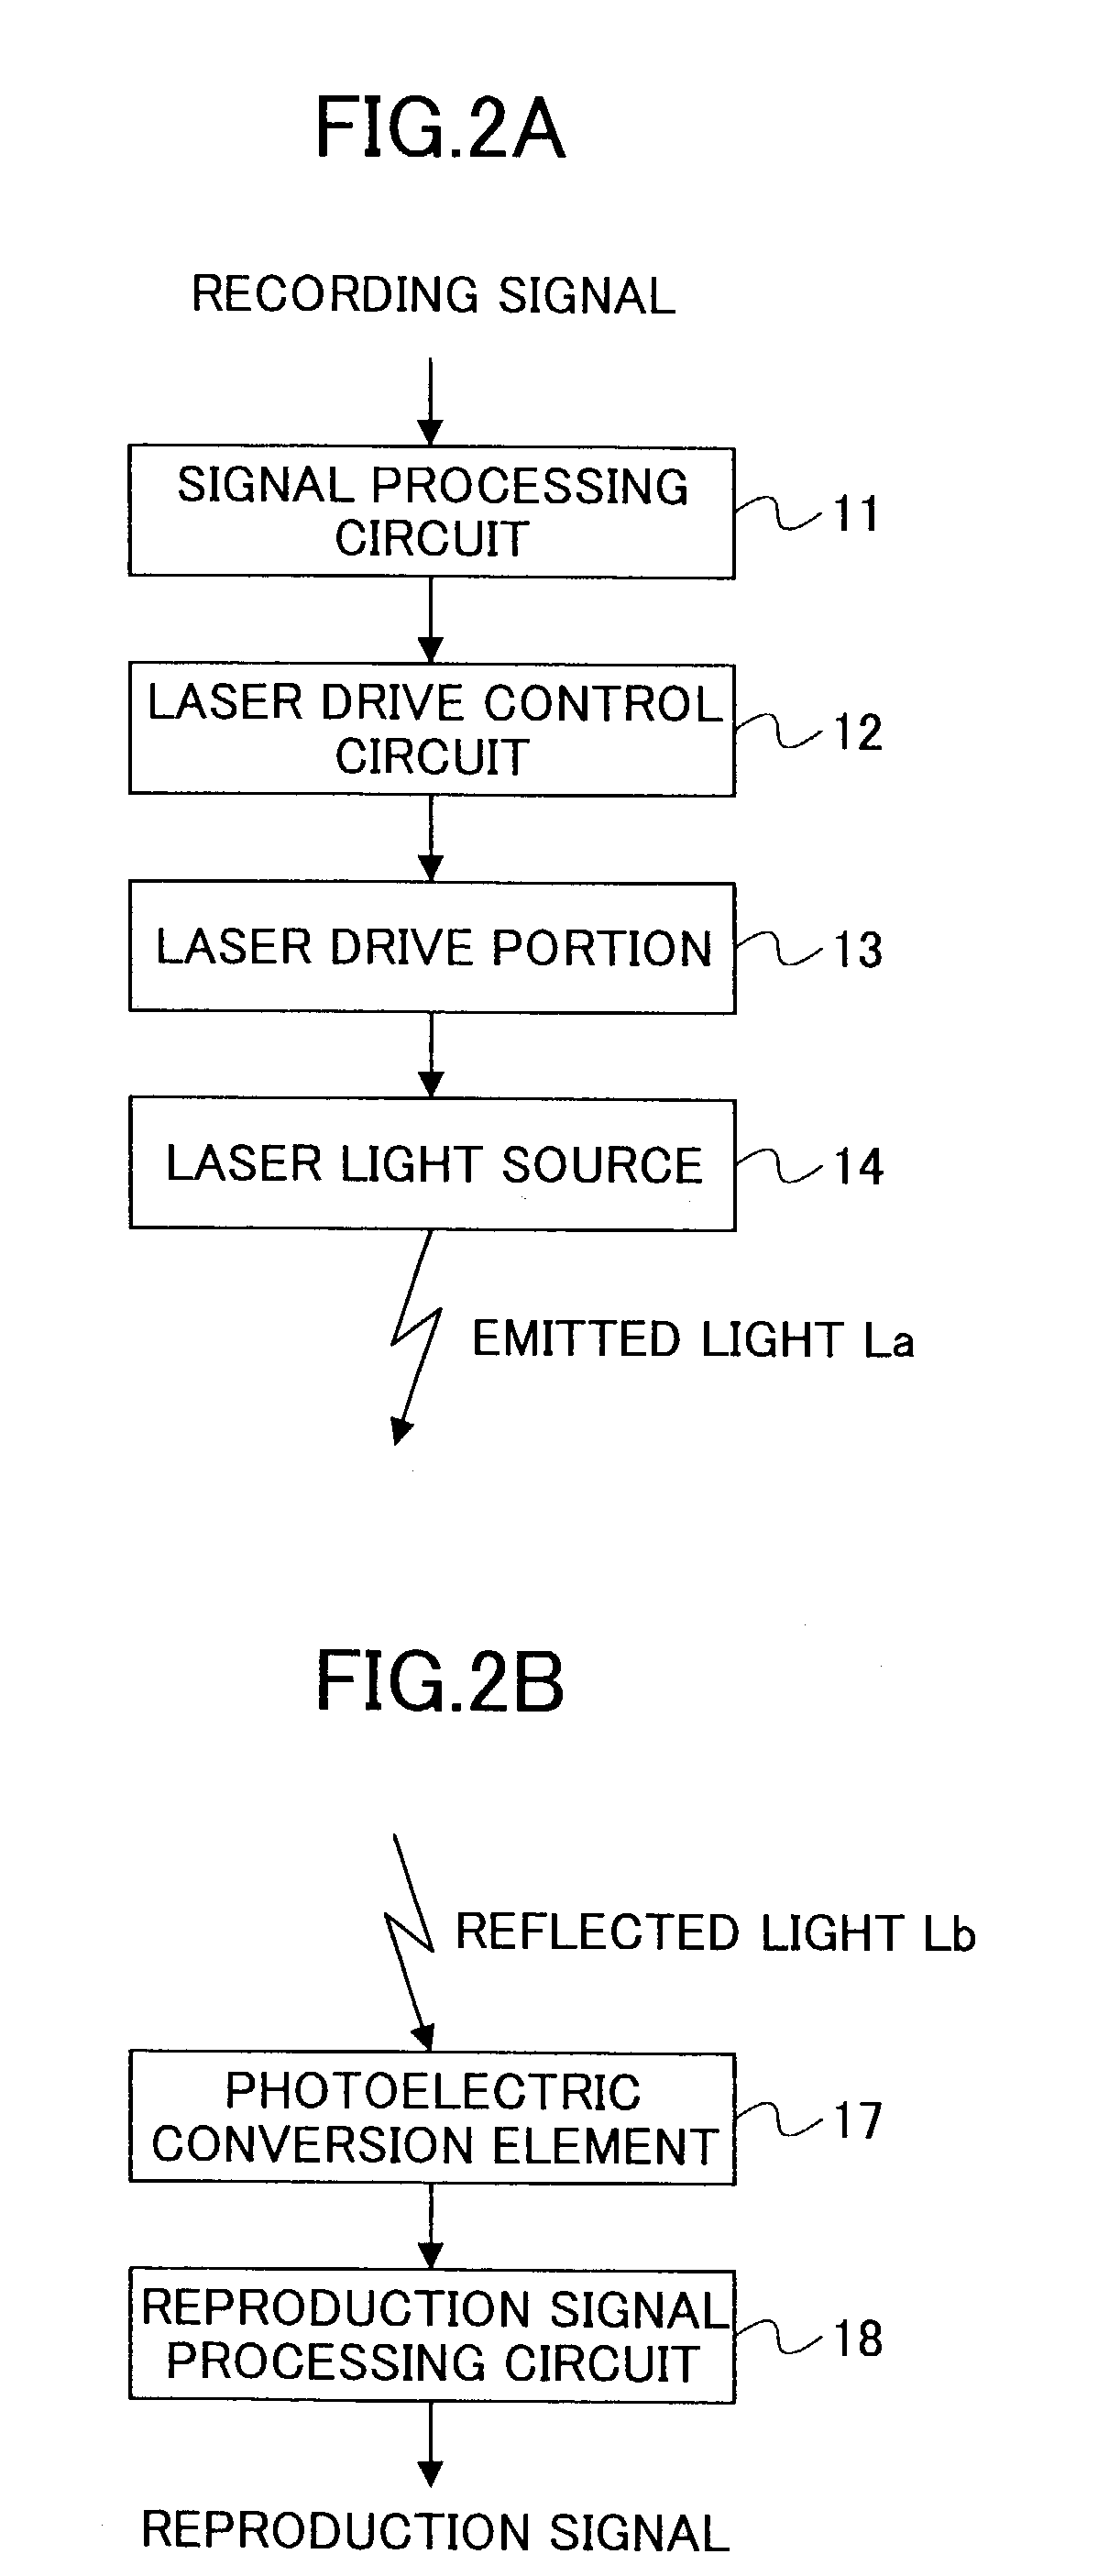 Method of controlling an optical disk apparatus